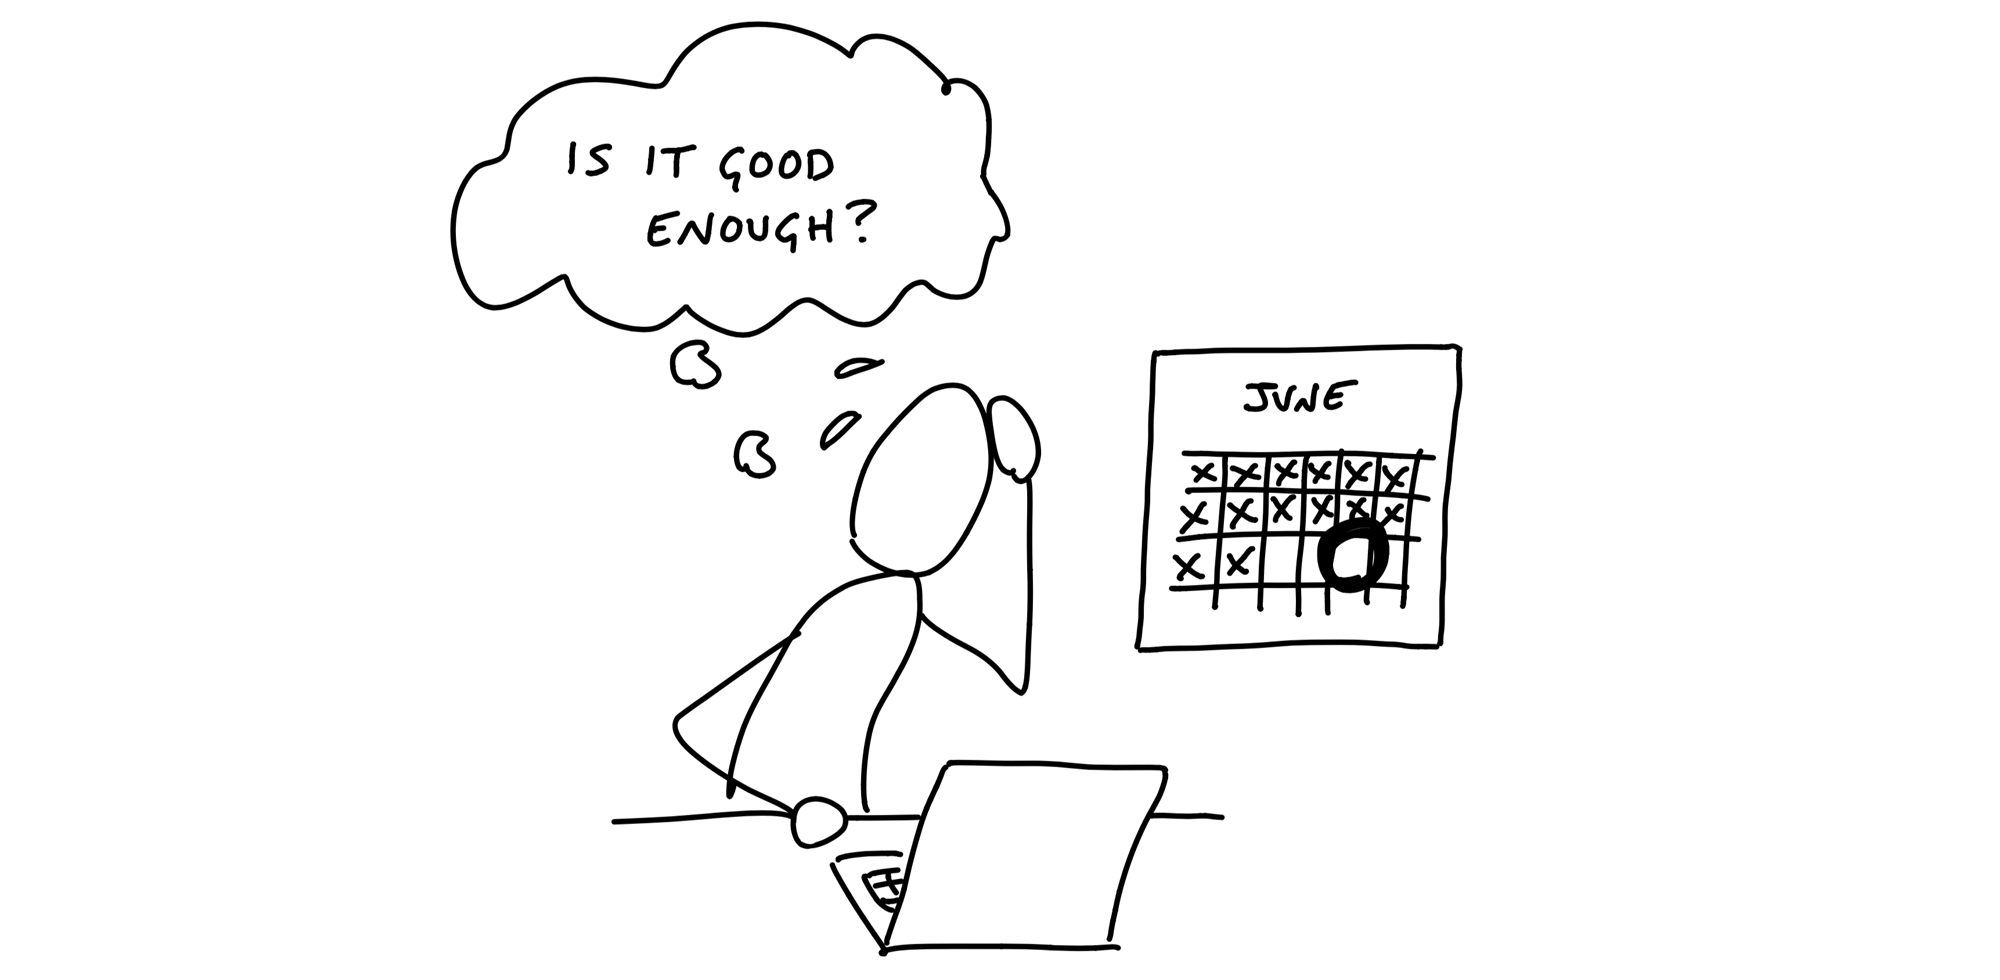 Cartoon. A figure sits in front of a laptop holding their hand in one hand and sweating. A calendar on the wall shows a deadline three two days away. Staring into the laptop, the figure asks in a thought bubble: Is it good enough?